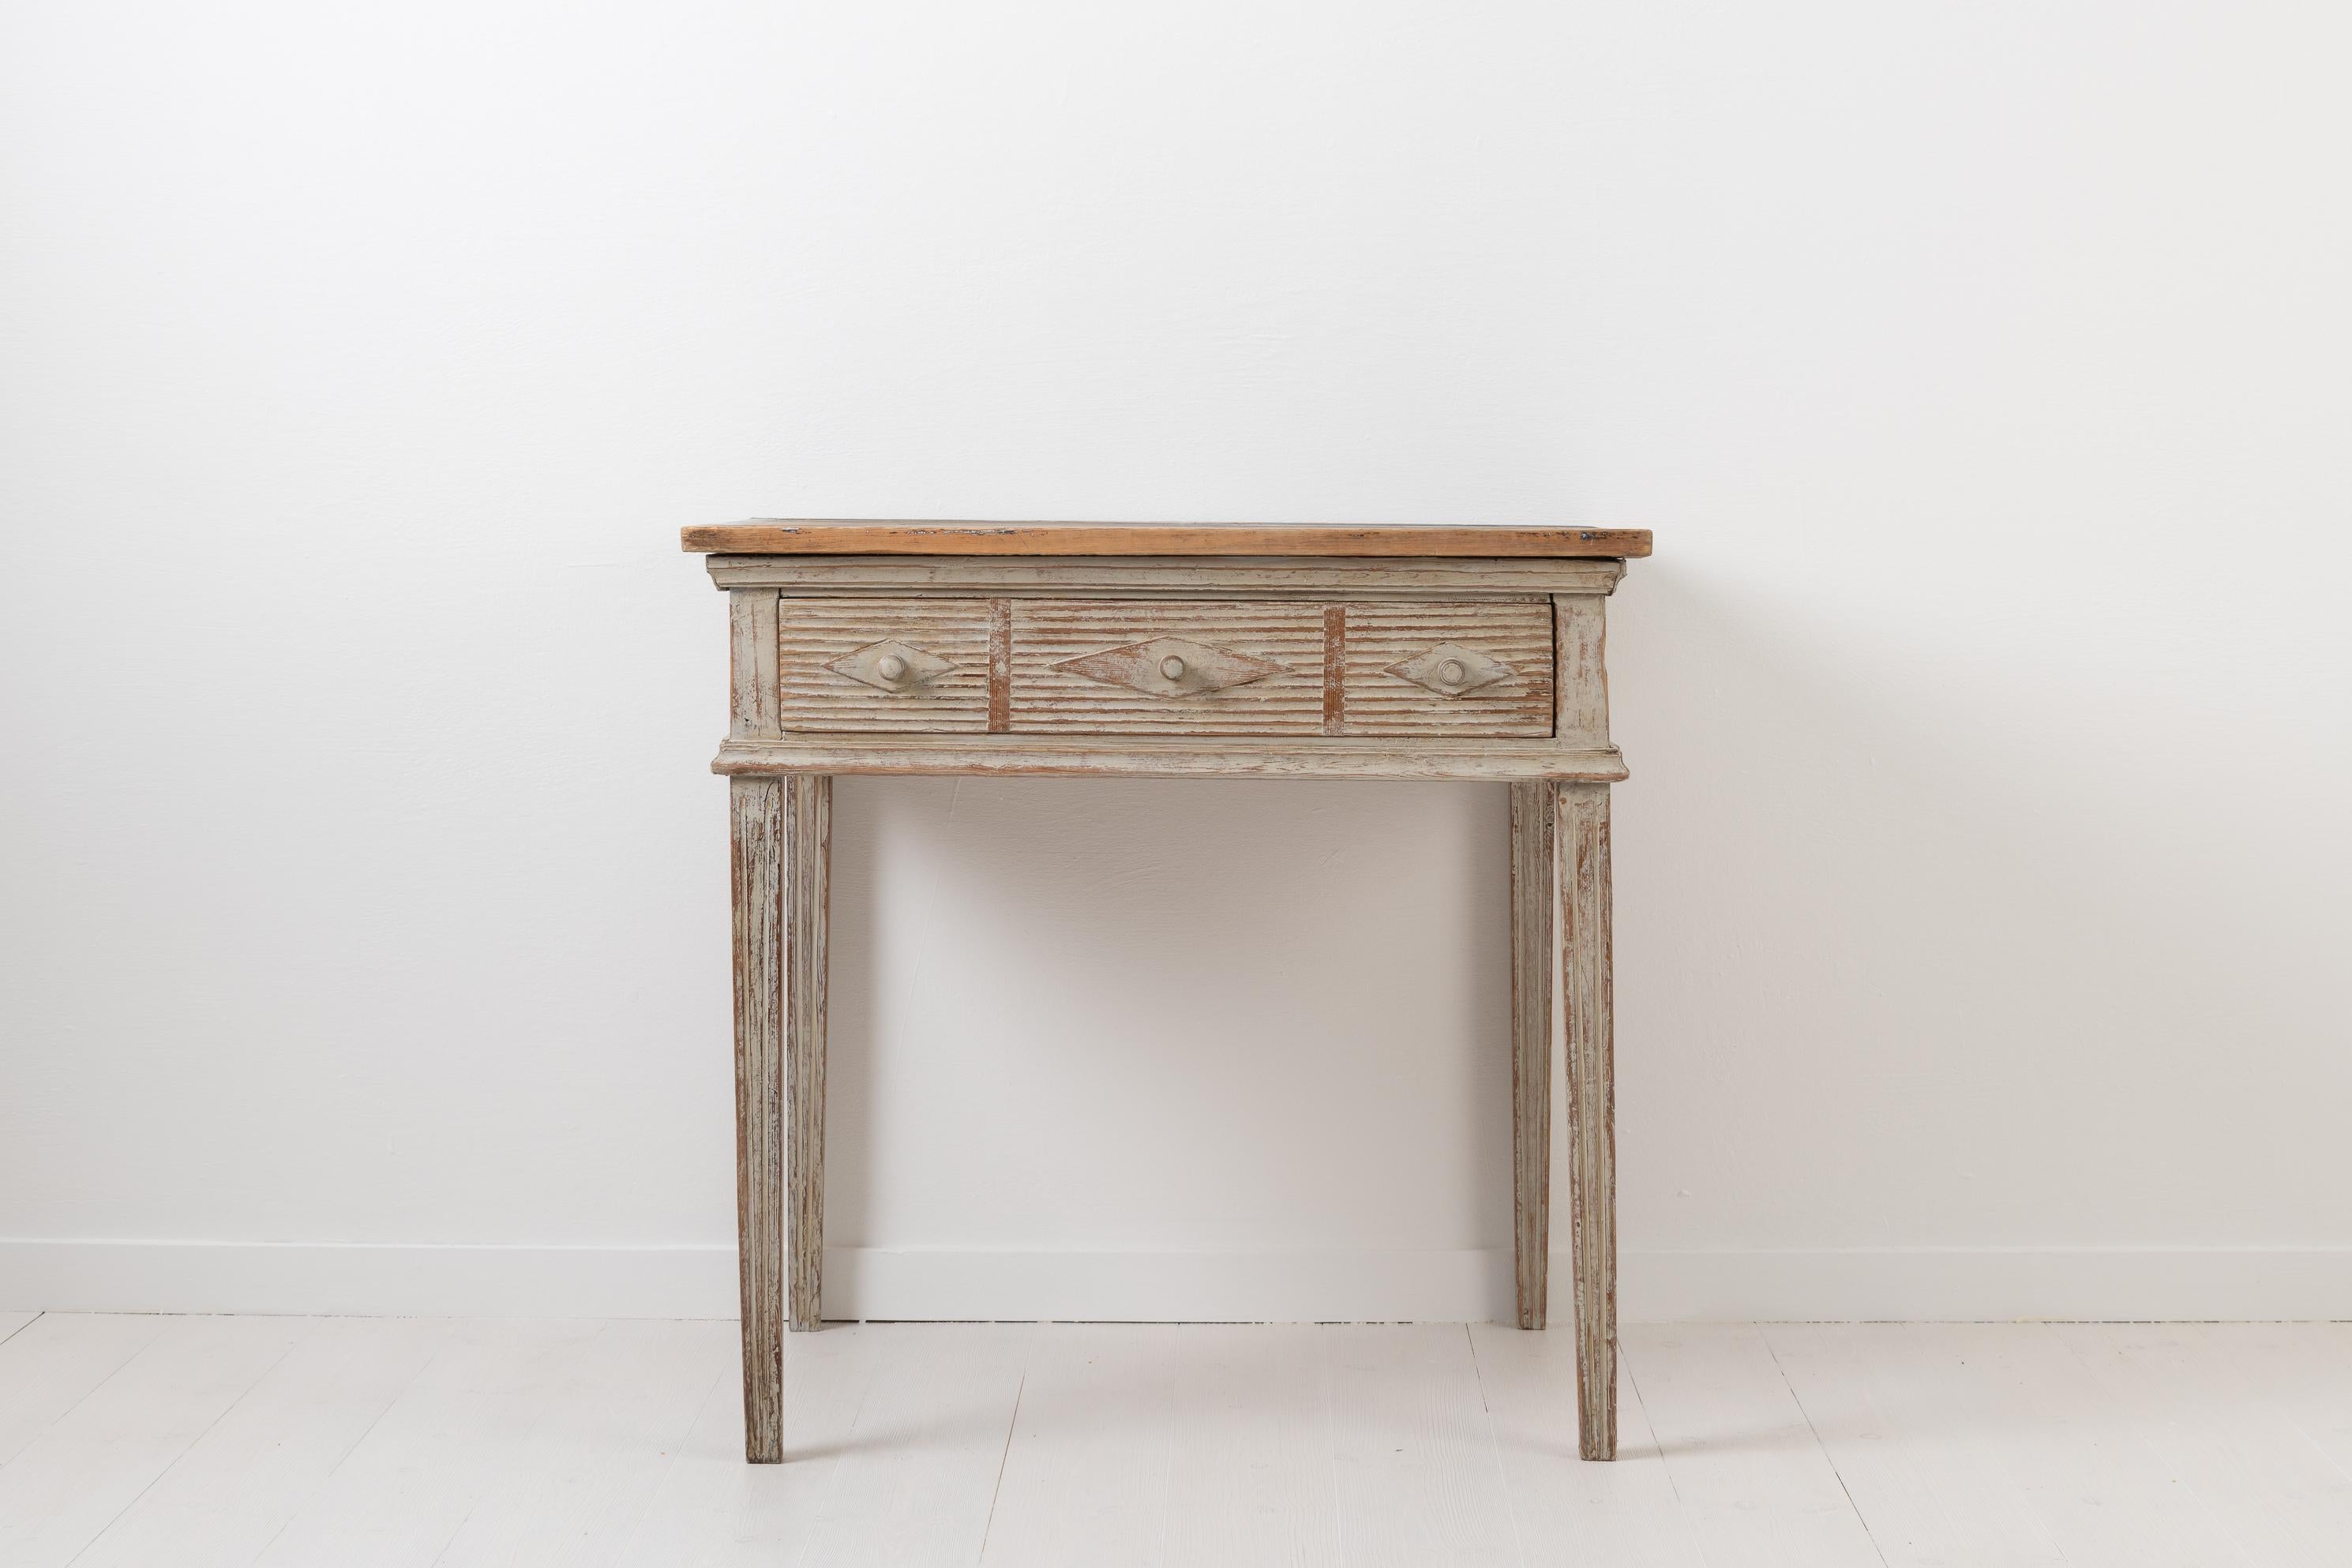 Neoclassical Swedish Gustavian Wall Table from 1790